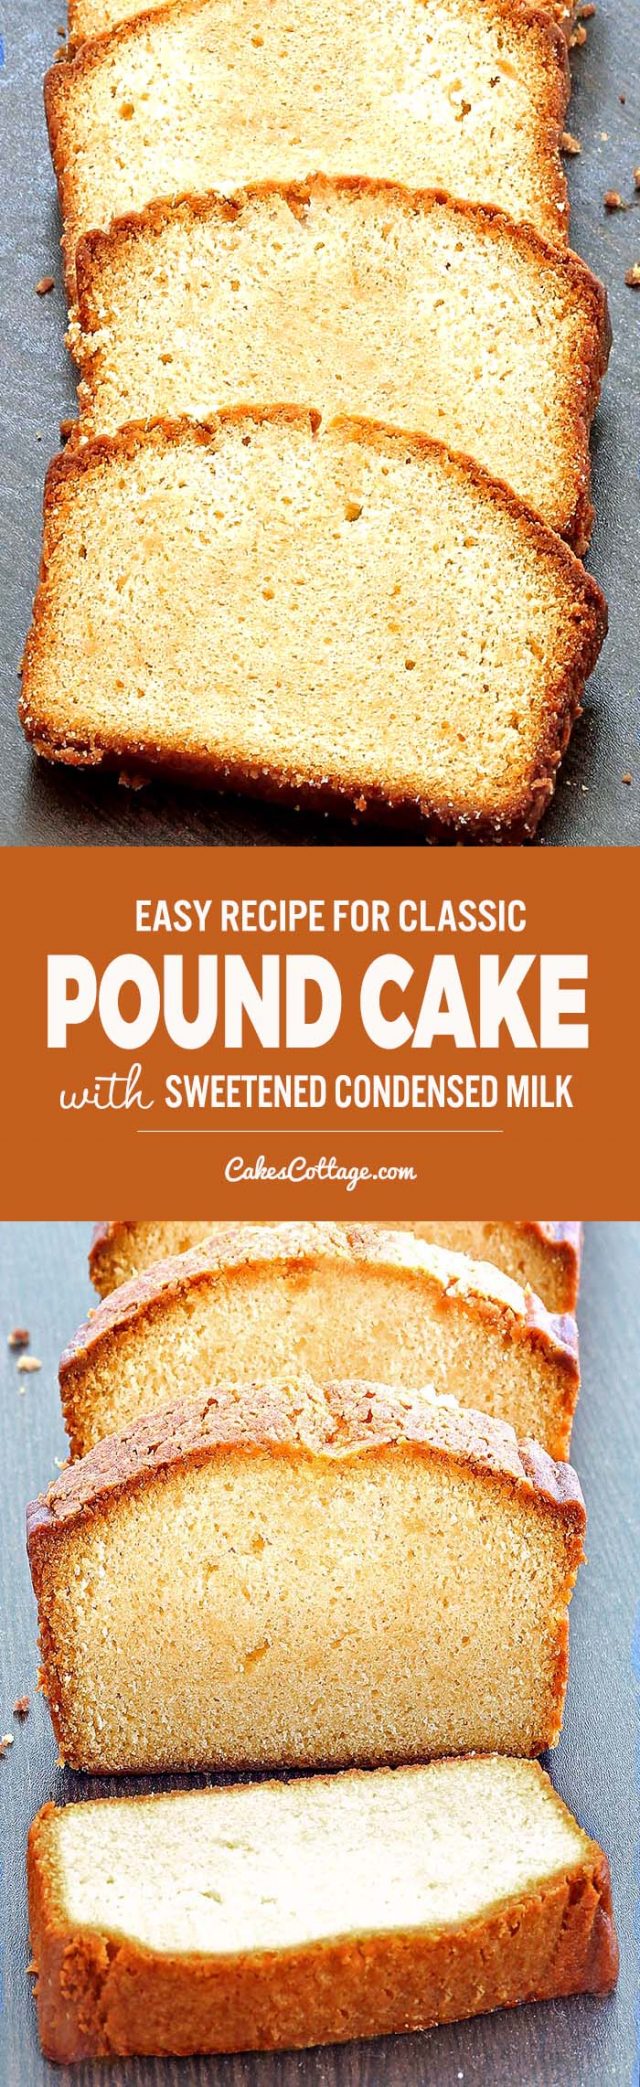 THE BEST POUND CAKE you will EVER try ! Pound cake with condensed milk recipe will surely become a classic in your home.